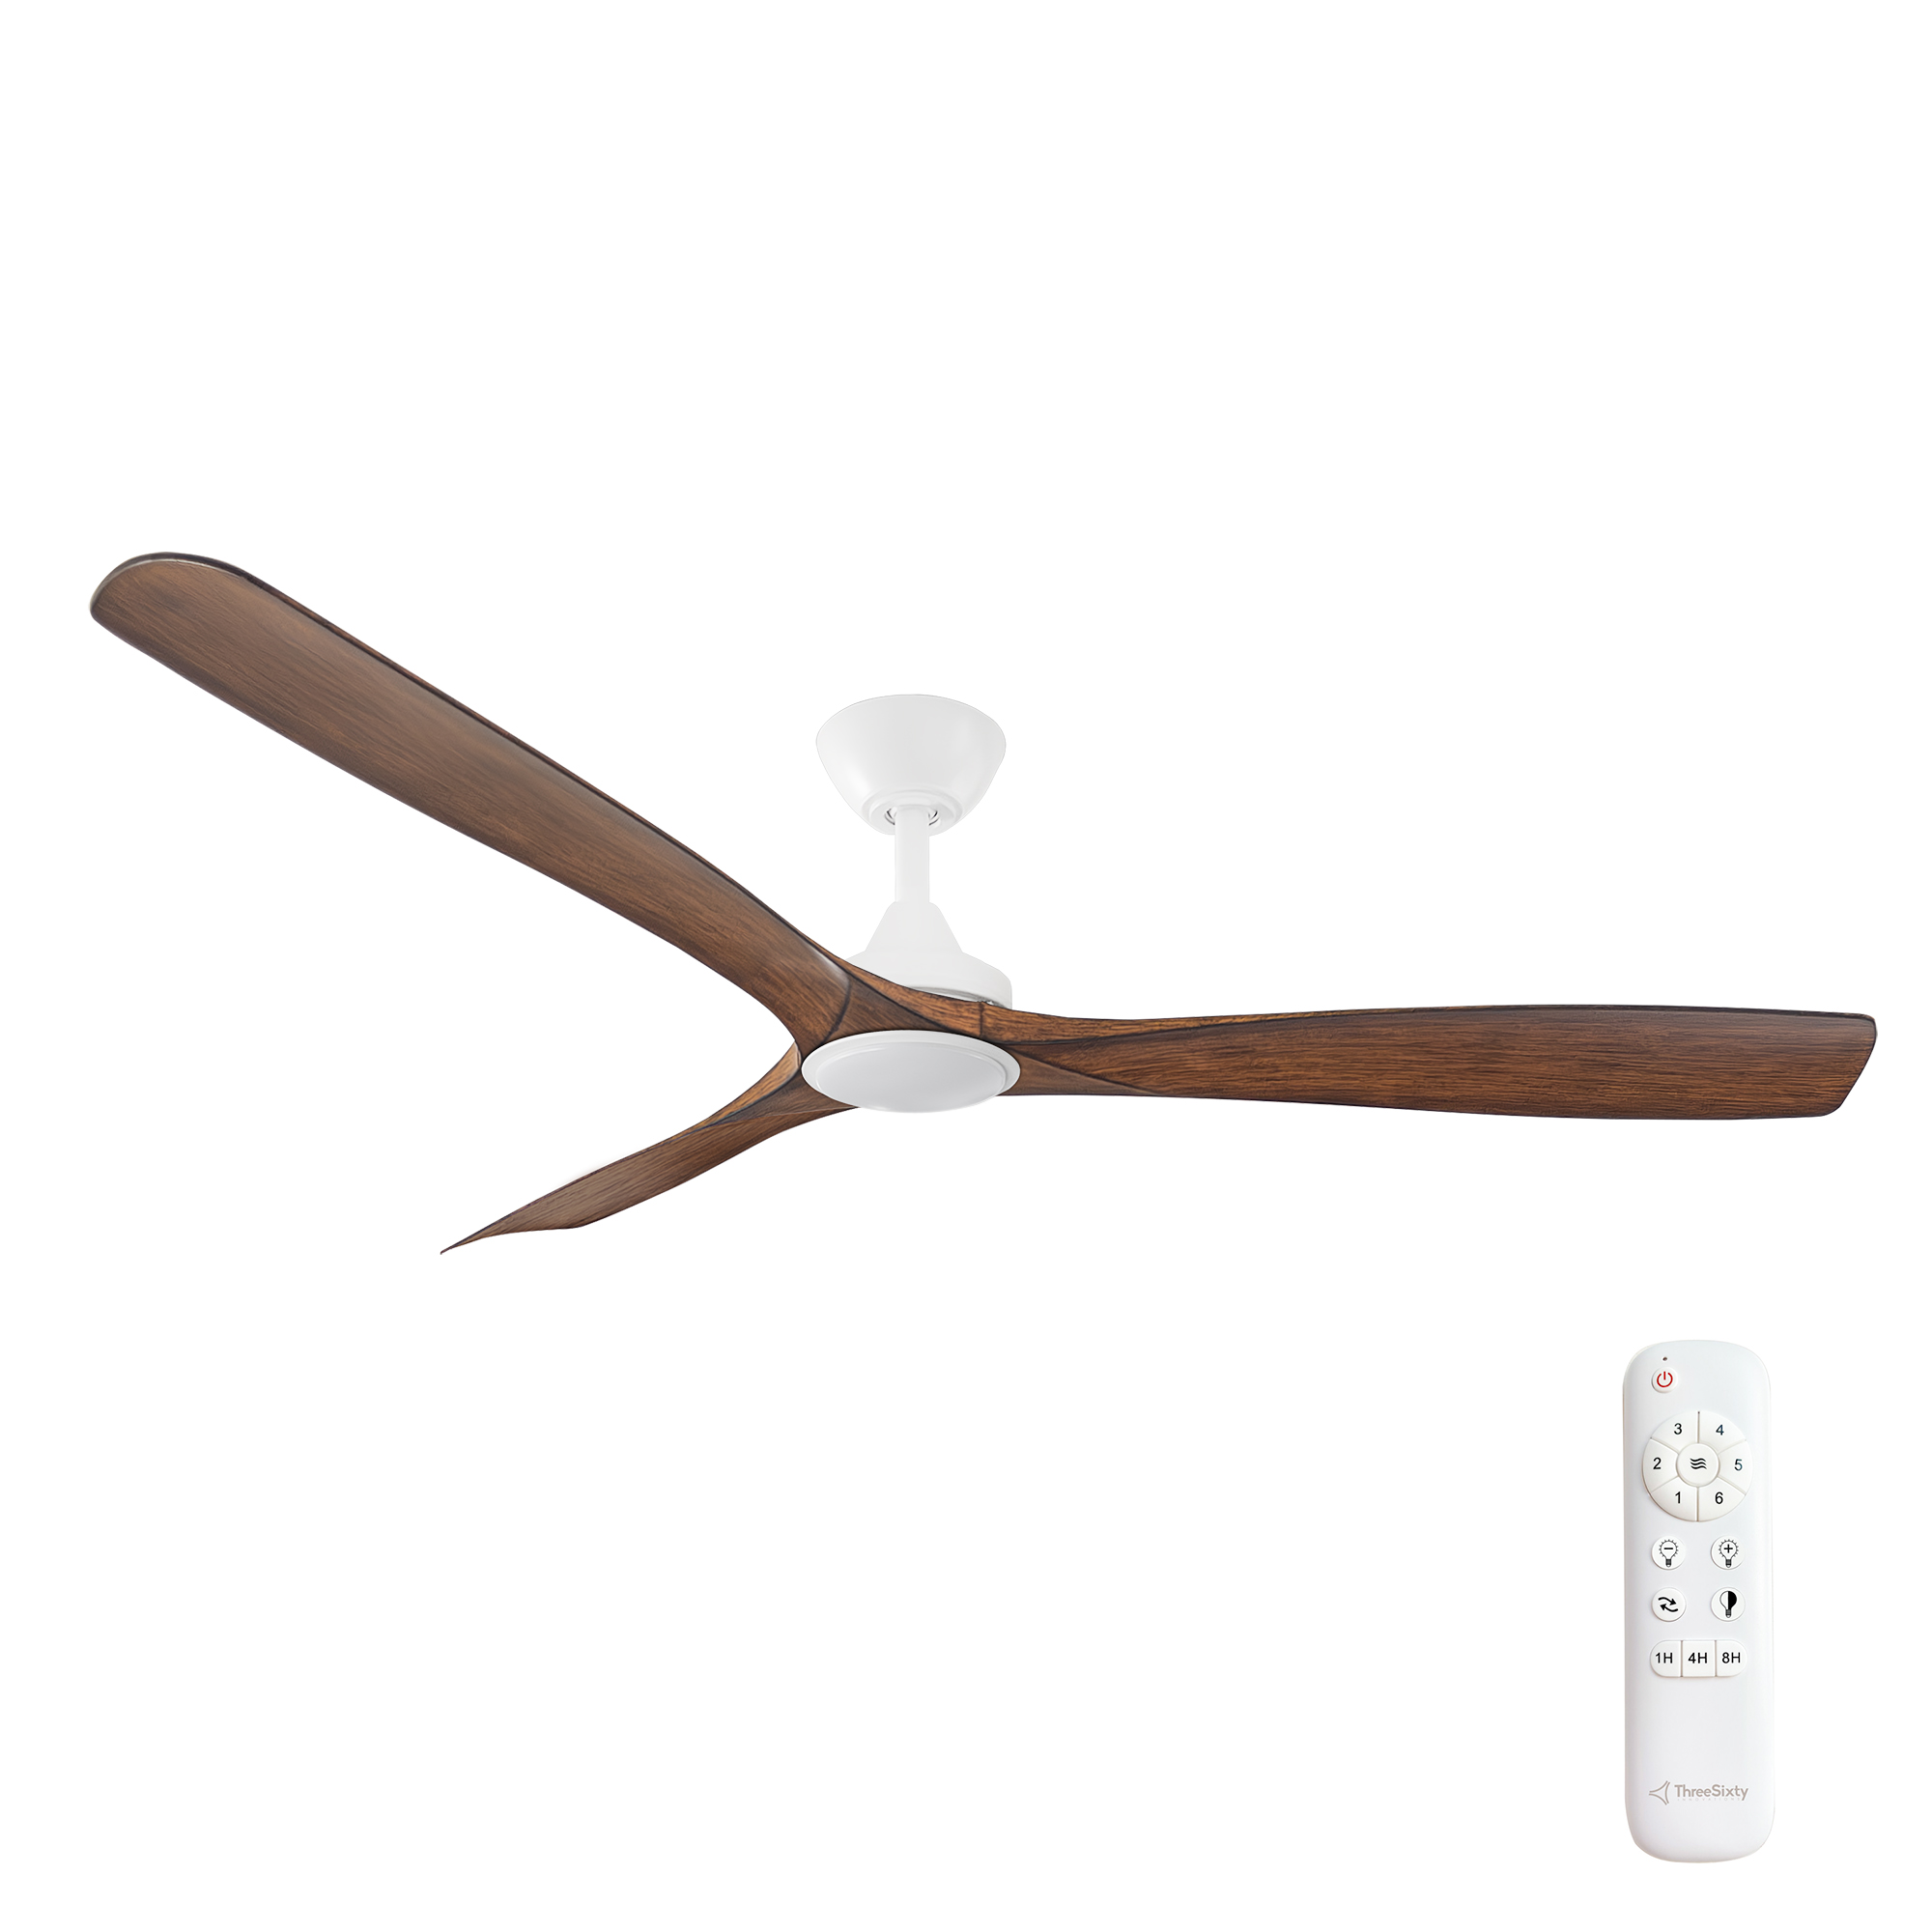 60" Spitfire DC Ceiling Fan in Matte White with Koa blades and 18W CCT LED Light